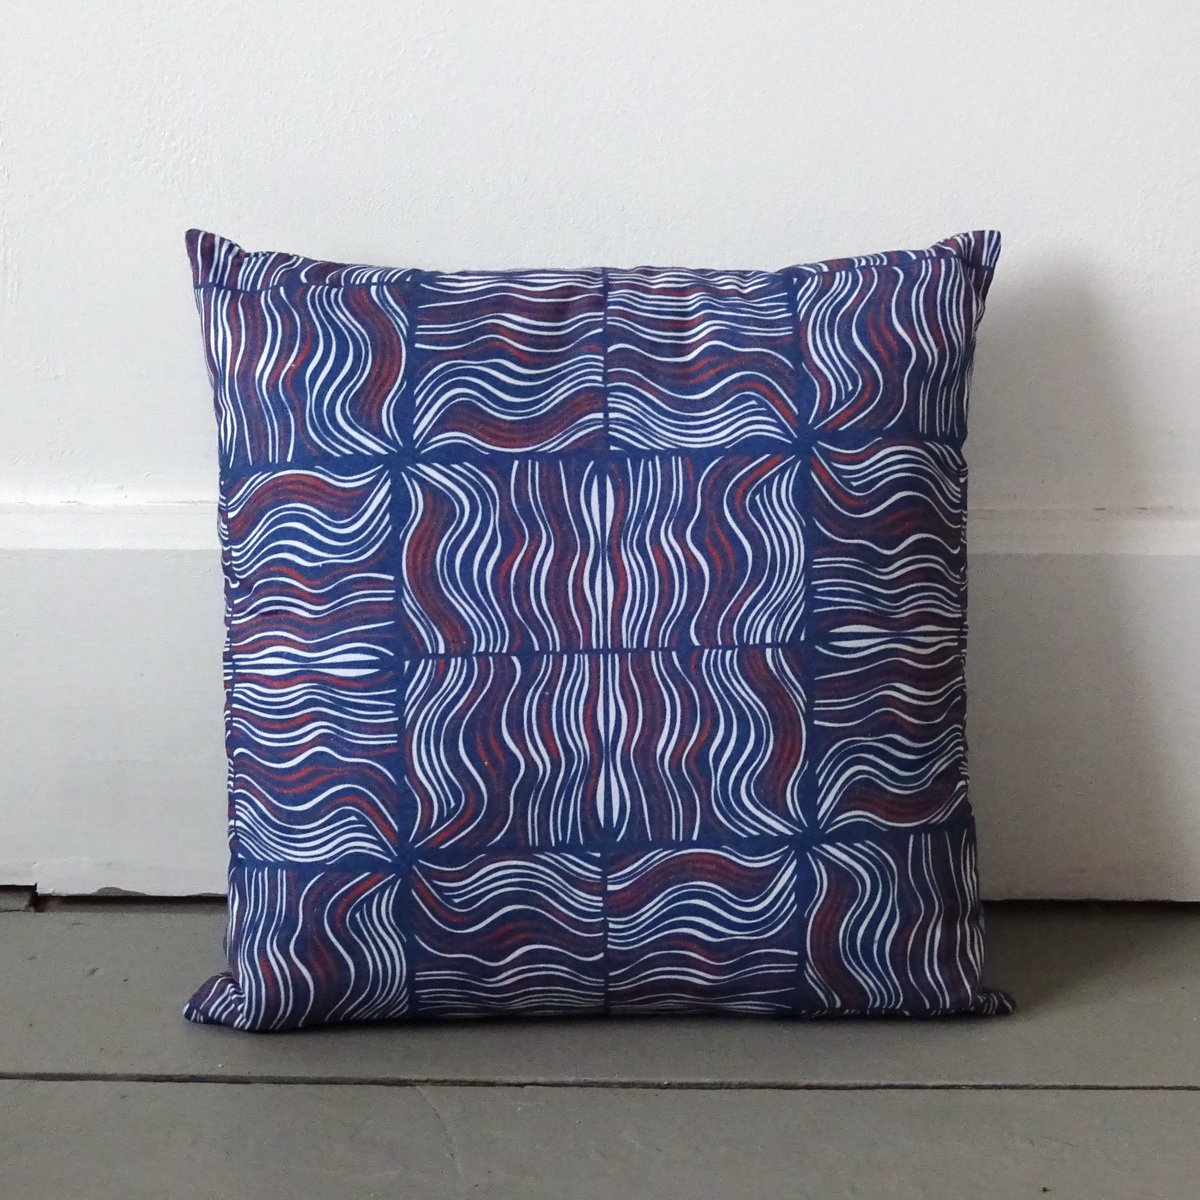 small cushion wavy lines in blue red and white called making waves wicked imp degsigns